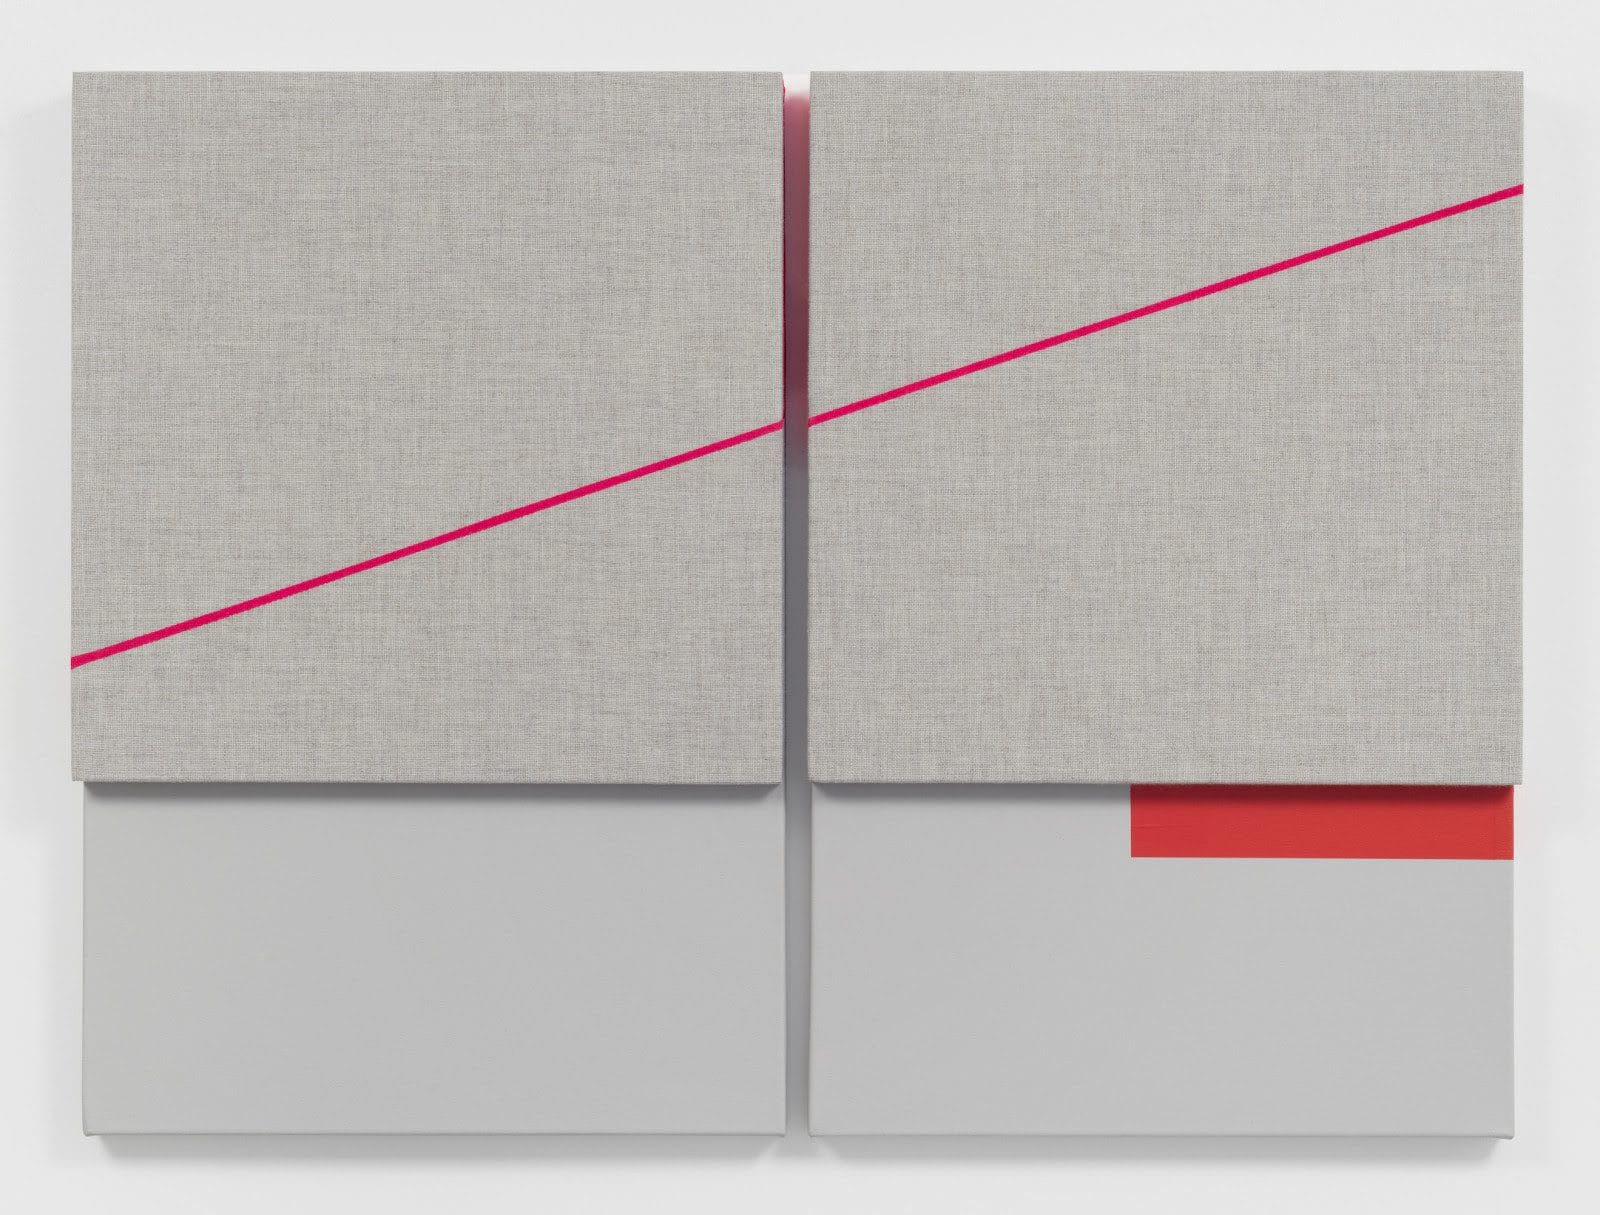 Jennie C. Jones, Fractured Crescendo, Red Rest, 2020, acoustic absorber panel and acrylic on canvas, diptych overall: 36 x 49 1/2 x 2 in (91.4 x 125.7 x 5.1 cm), each: 36 x 24 x 2 in (91.4 x 61 x 5.1 cm). Courtesy Alexander Gray Associates, New York; Patron Gallery, Chicago, IL, © Jennie C. Jones /Artists Rights Society (ARS), New York.